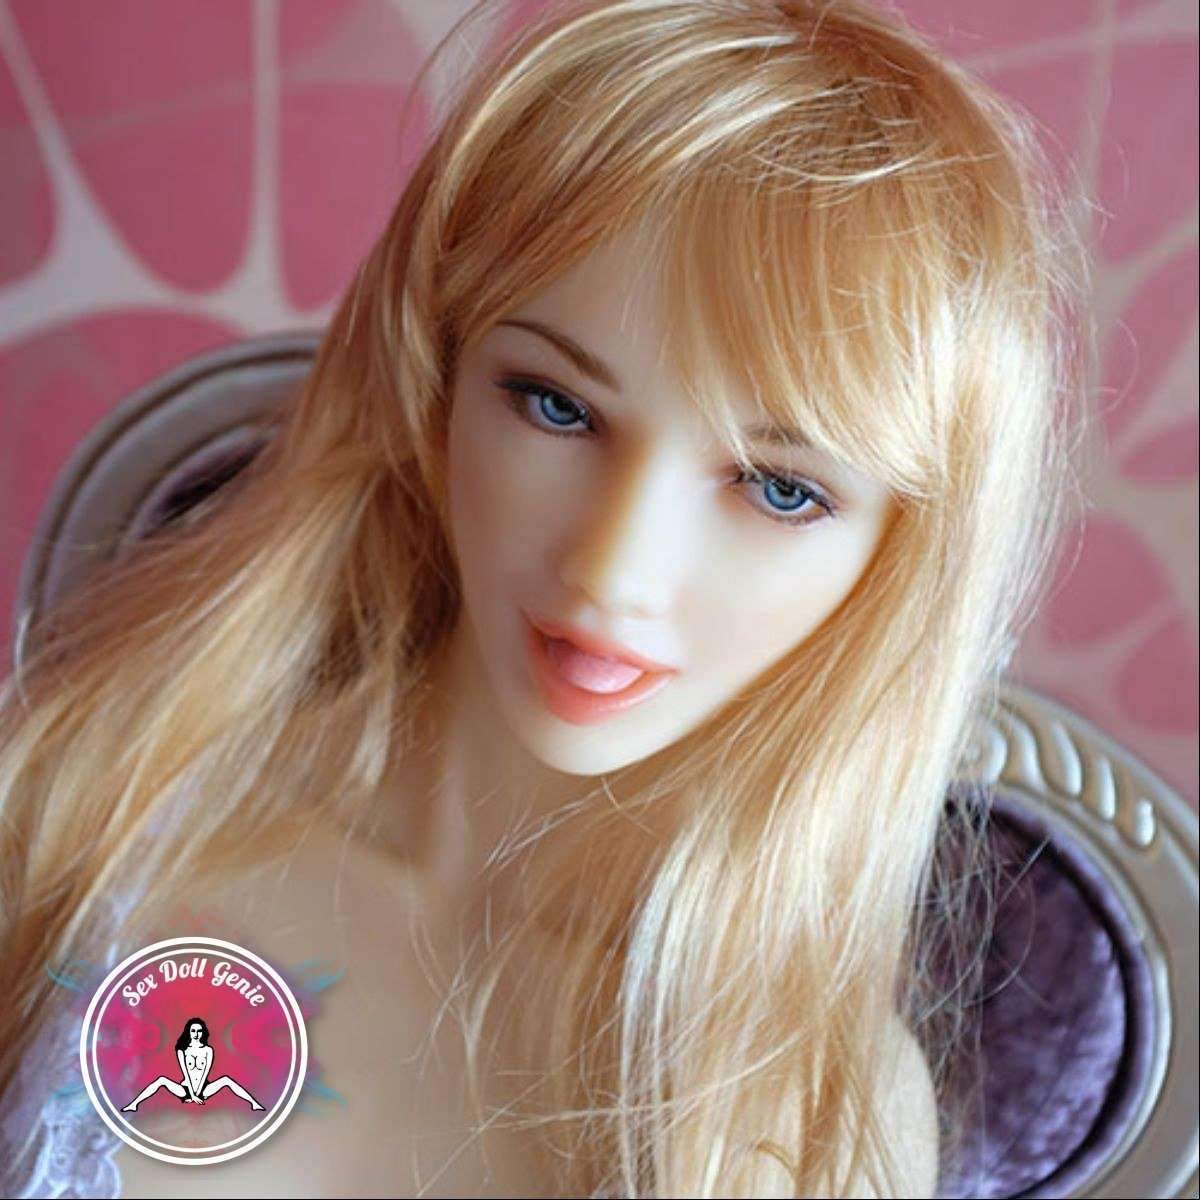 DS Doll - 163 - Penny Head - Type 1 D Cup Silicone Doll-4